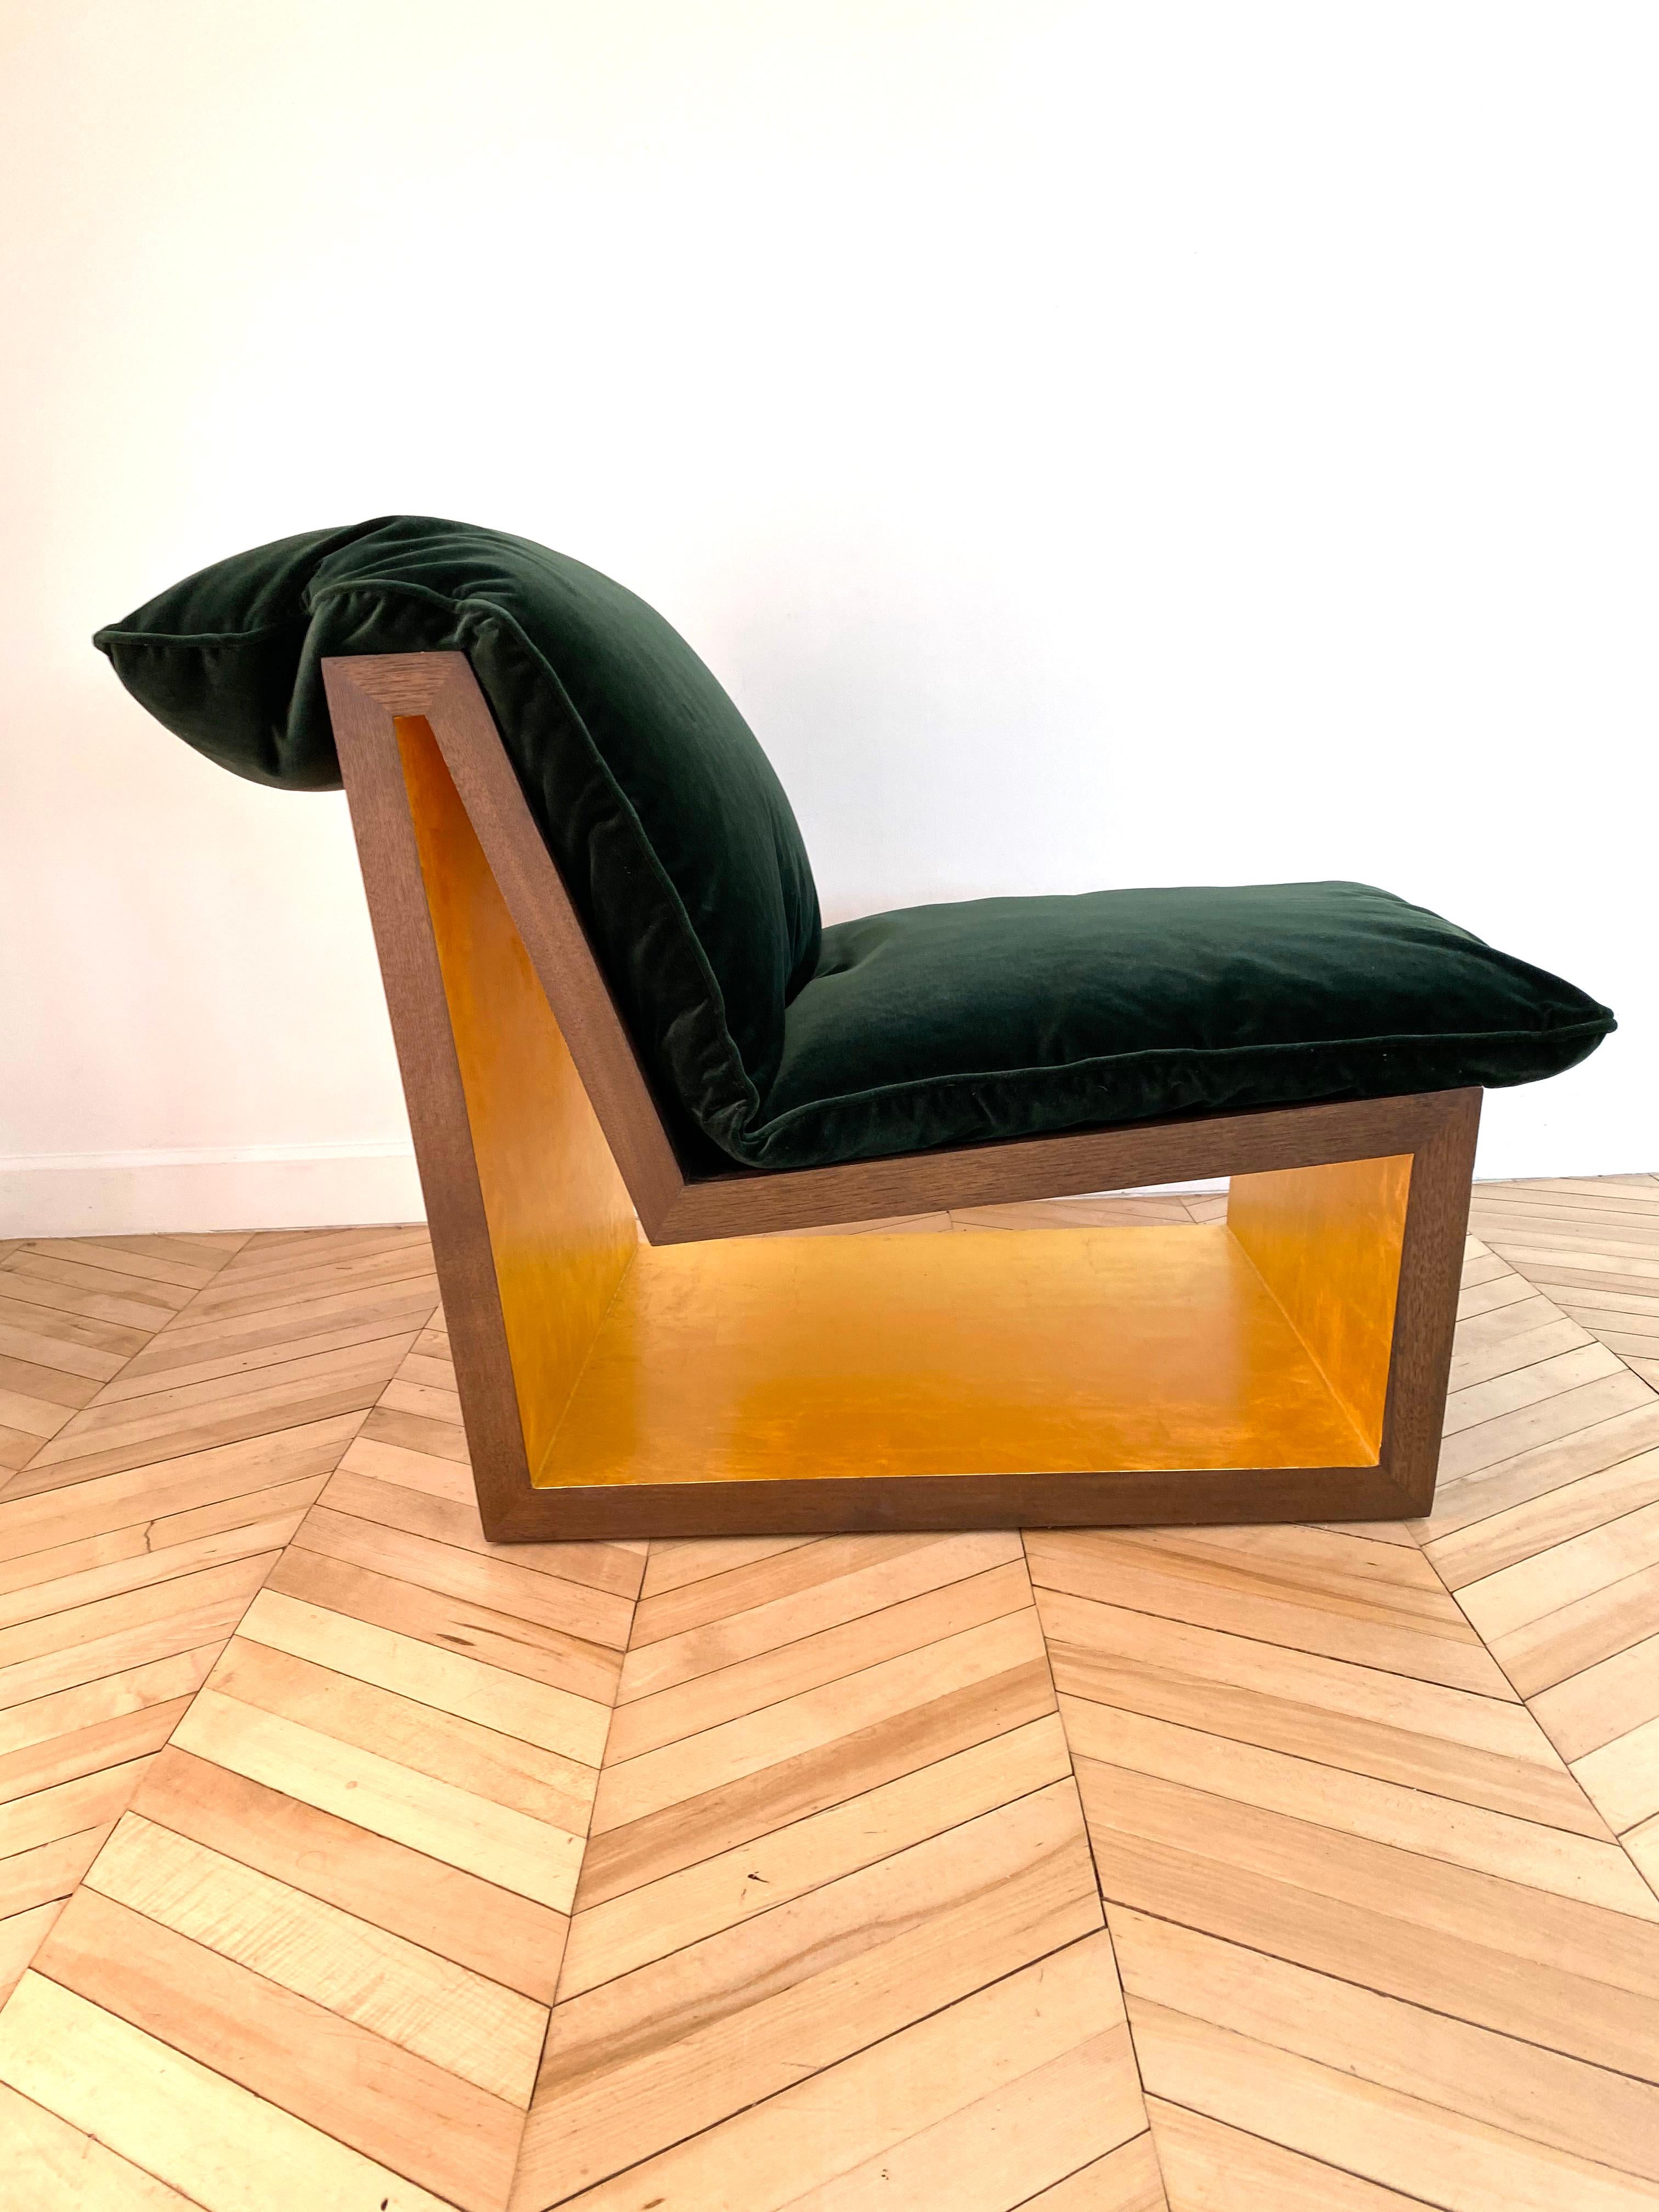 Modern Tucker Lounge Chair, Contemporary, Walnut and Gold Leaf, by Dean and Dahl